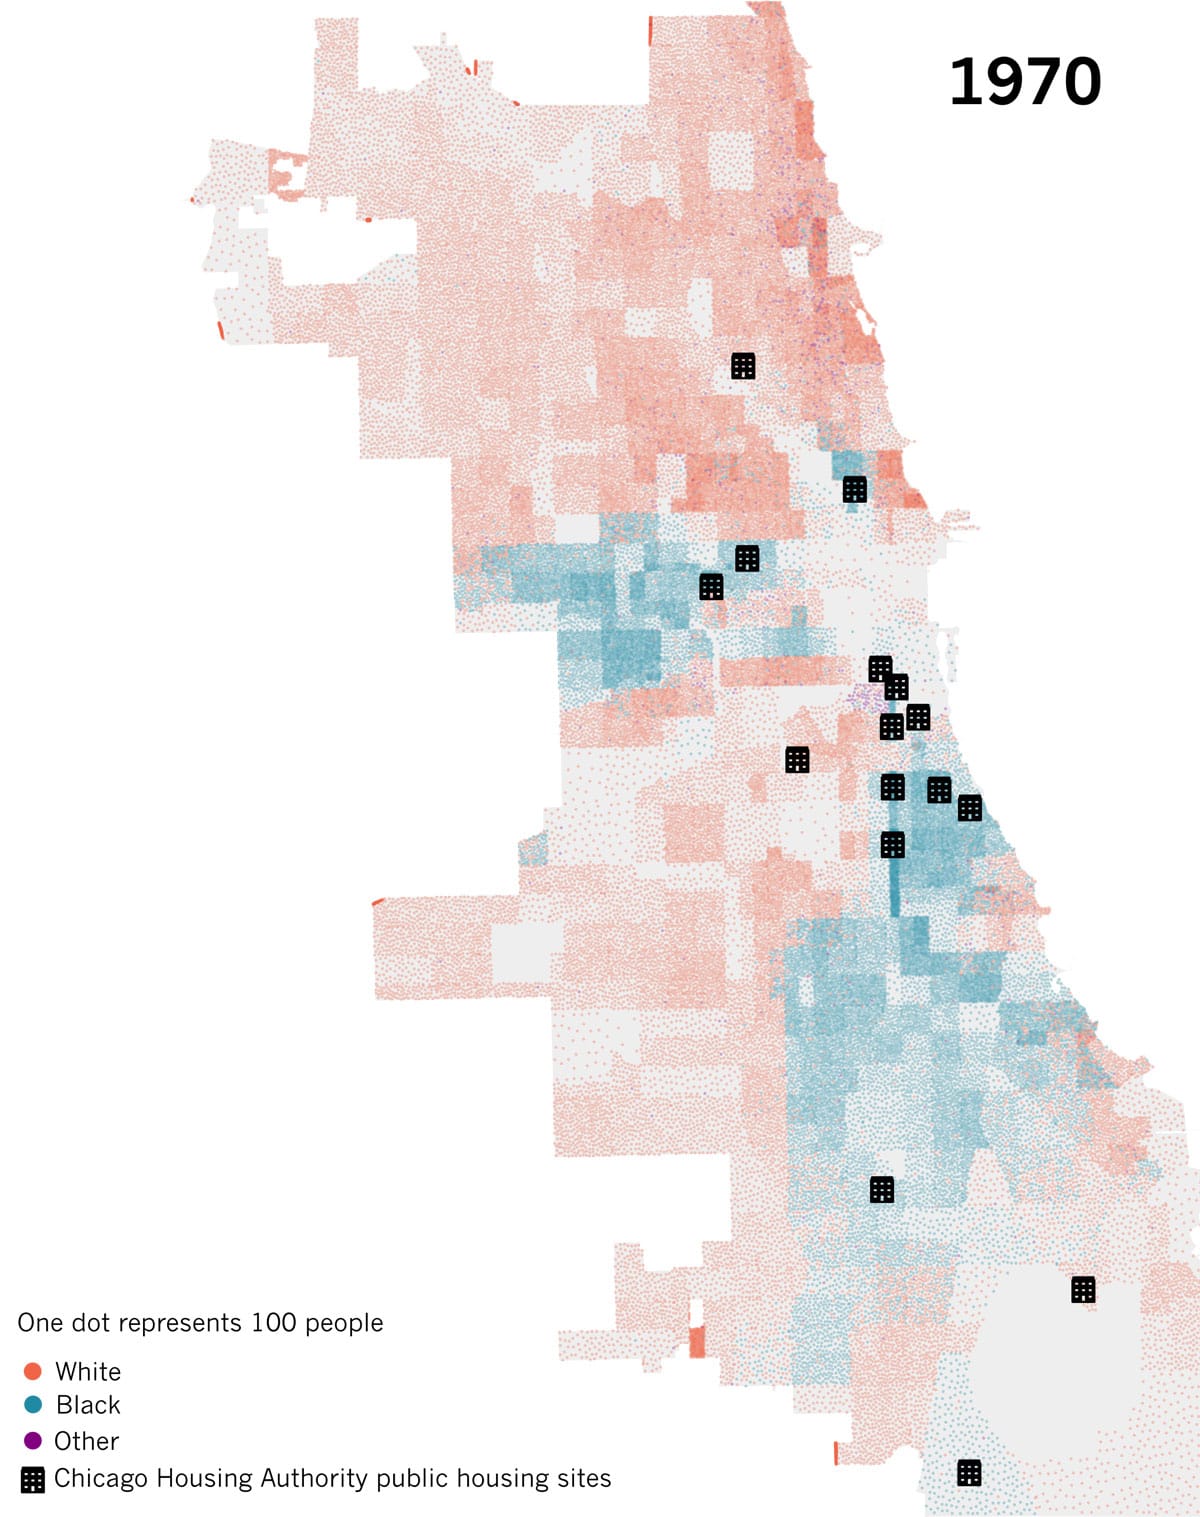 Map of racial population in Chicago in 1970